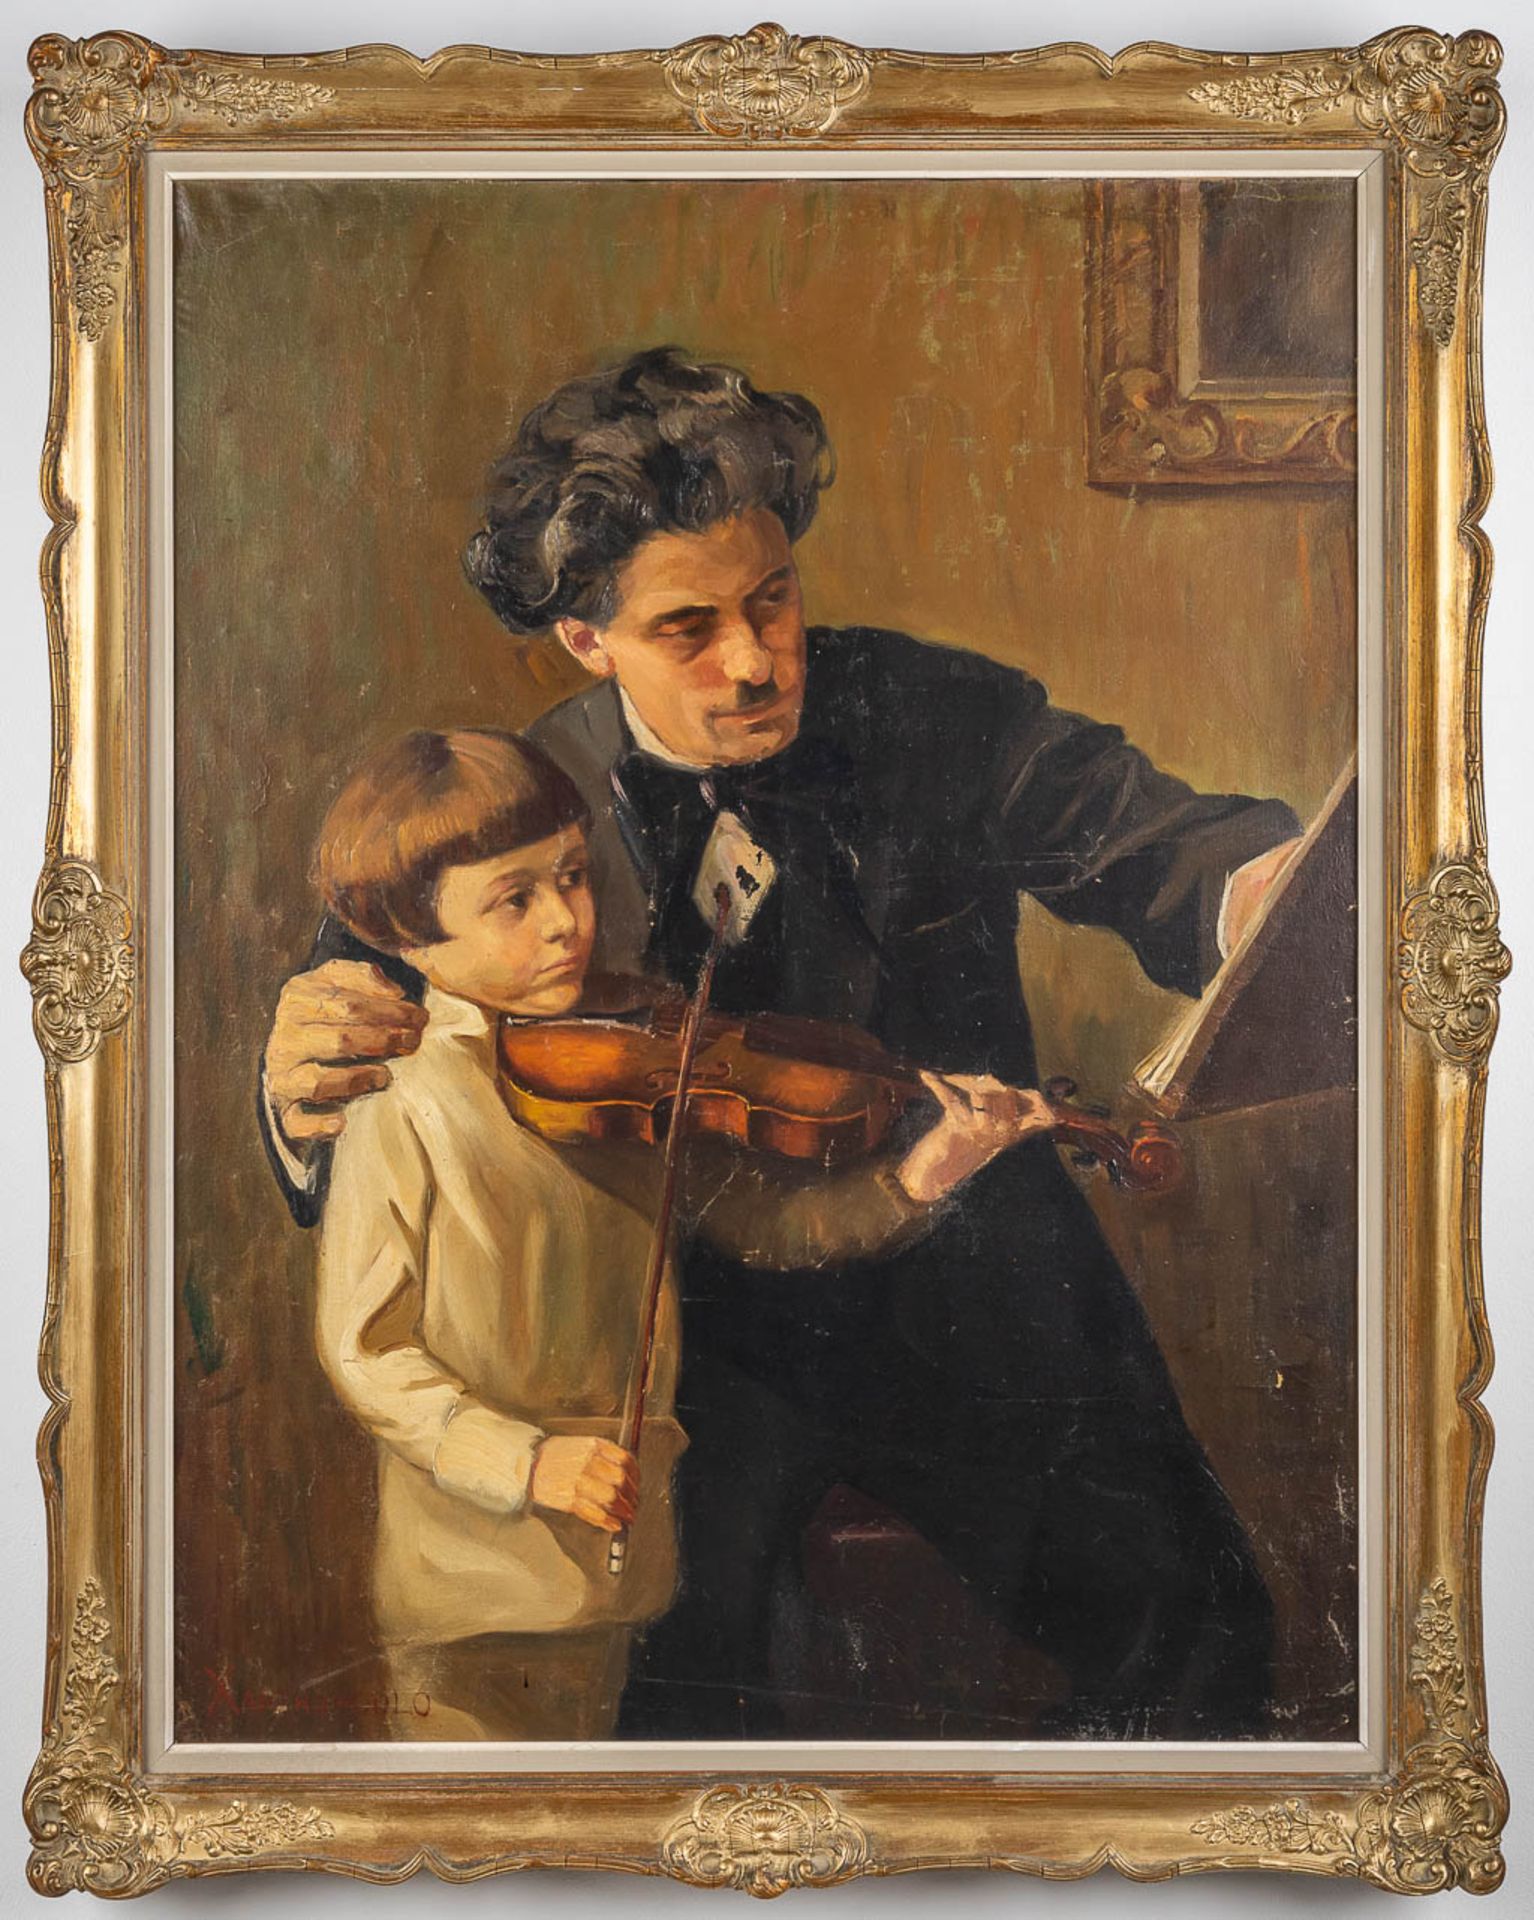 The Violin Player, a painting, oil on canvas. Signed Xanthopoulo. (W: 80 x H: 105 cm) - Image 3 of 12